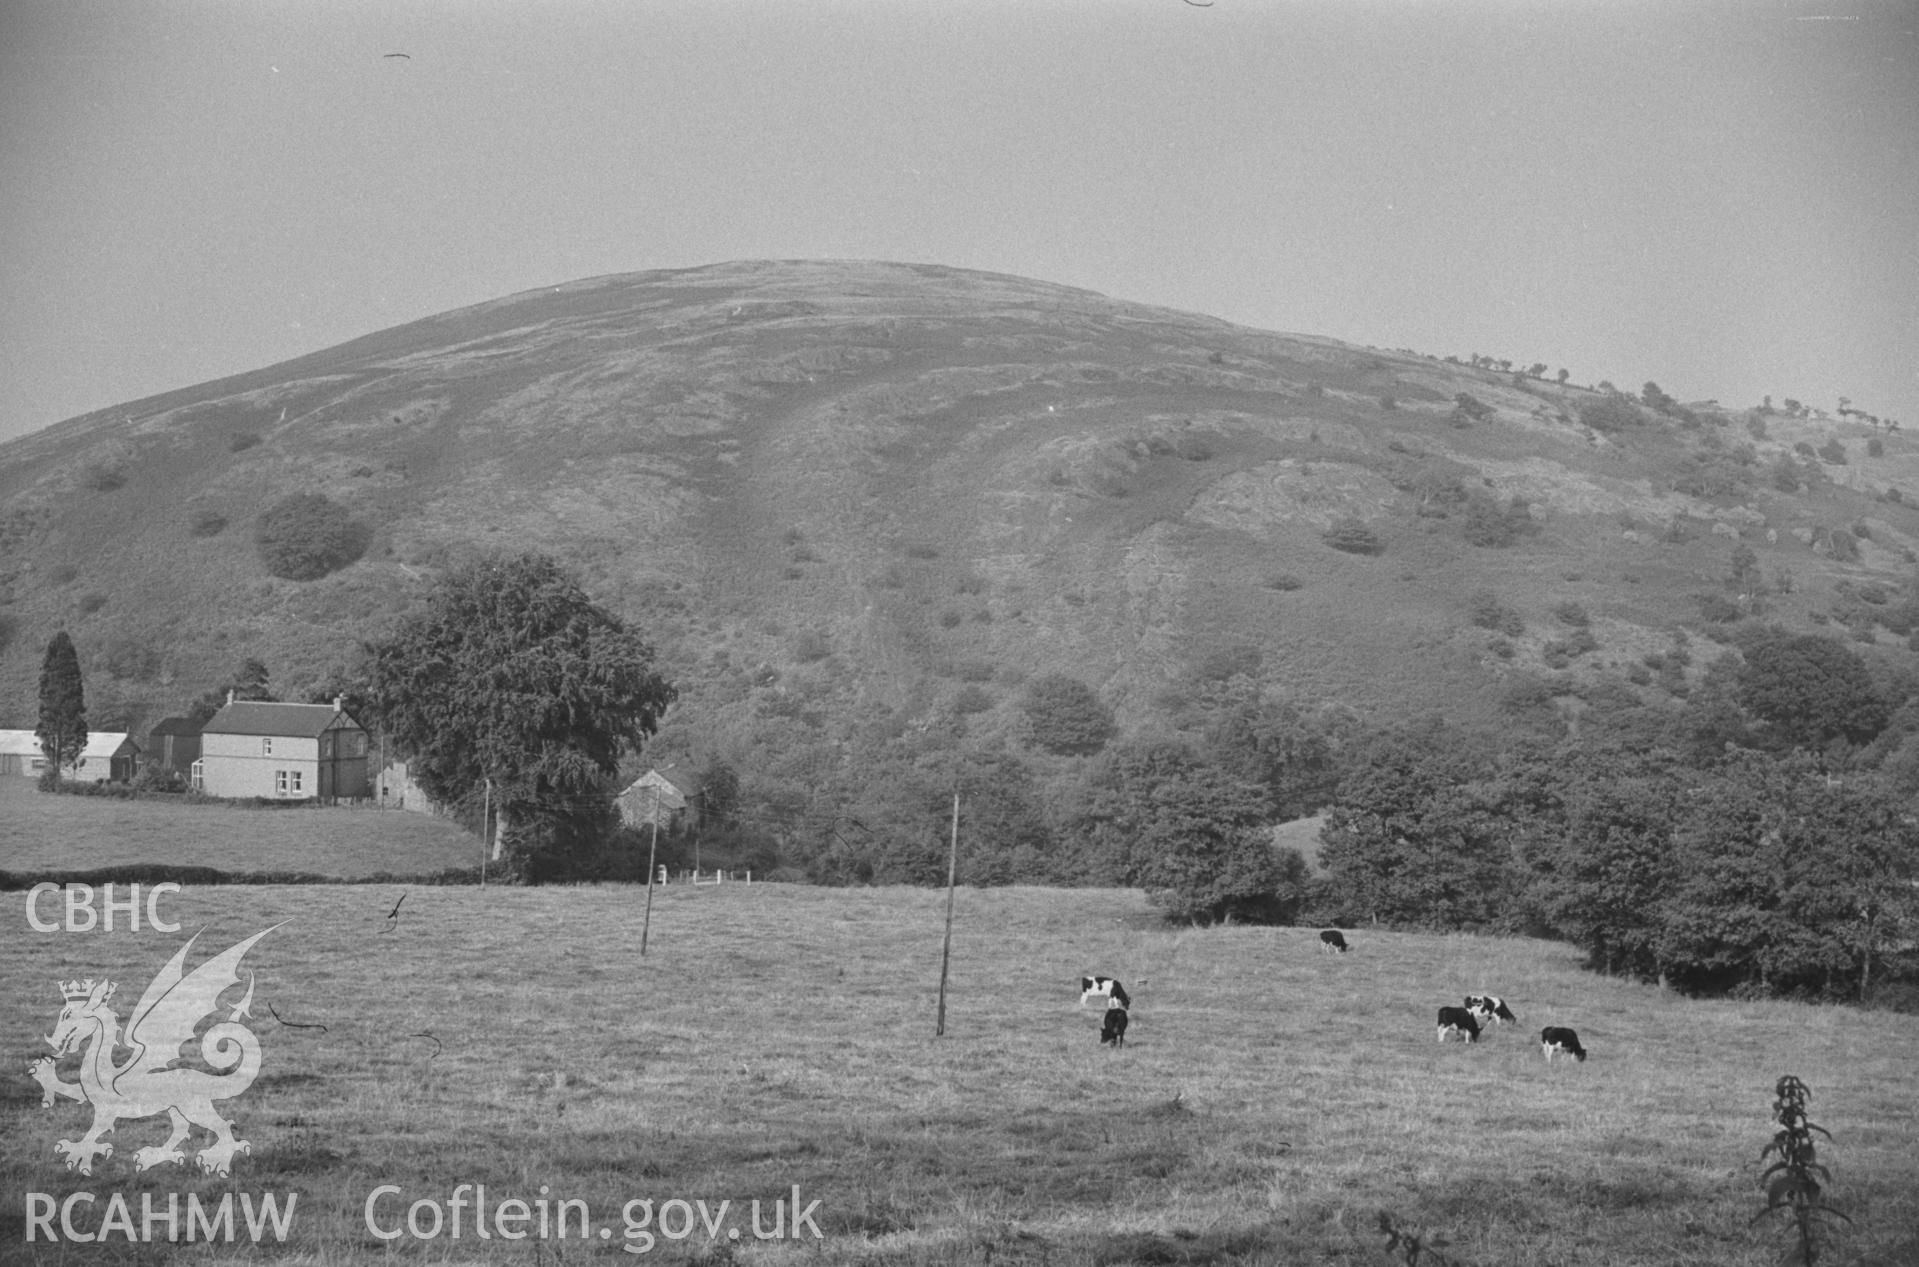 Digital copy of a black and white negative showing man view of mountainside and cows at Llanrhaeadr-ym-Mochnant. Photographed by Arthur O. Chater in September 1964.